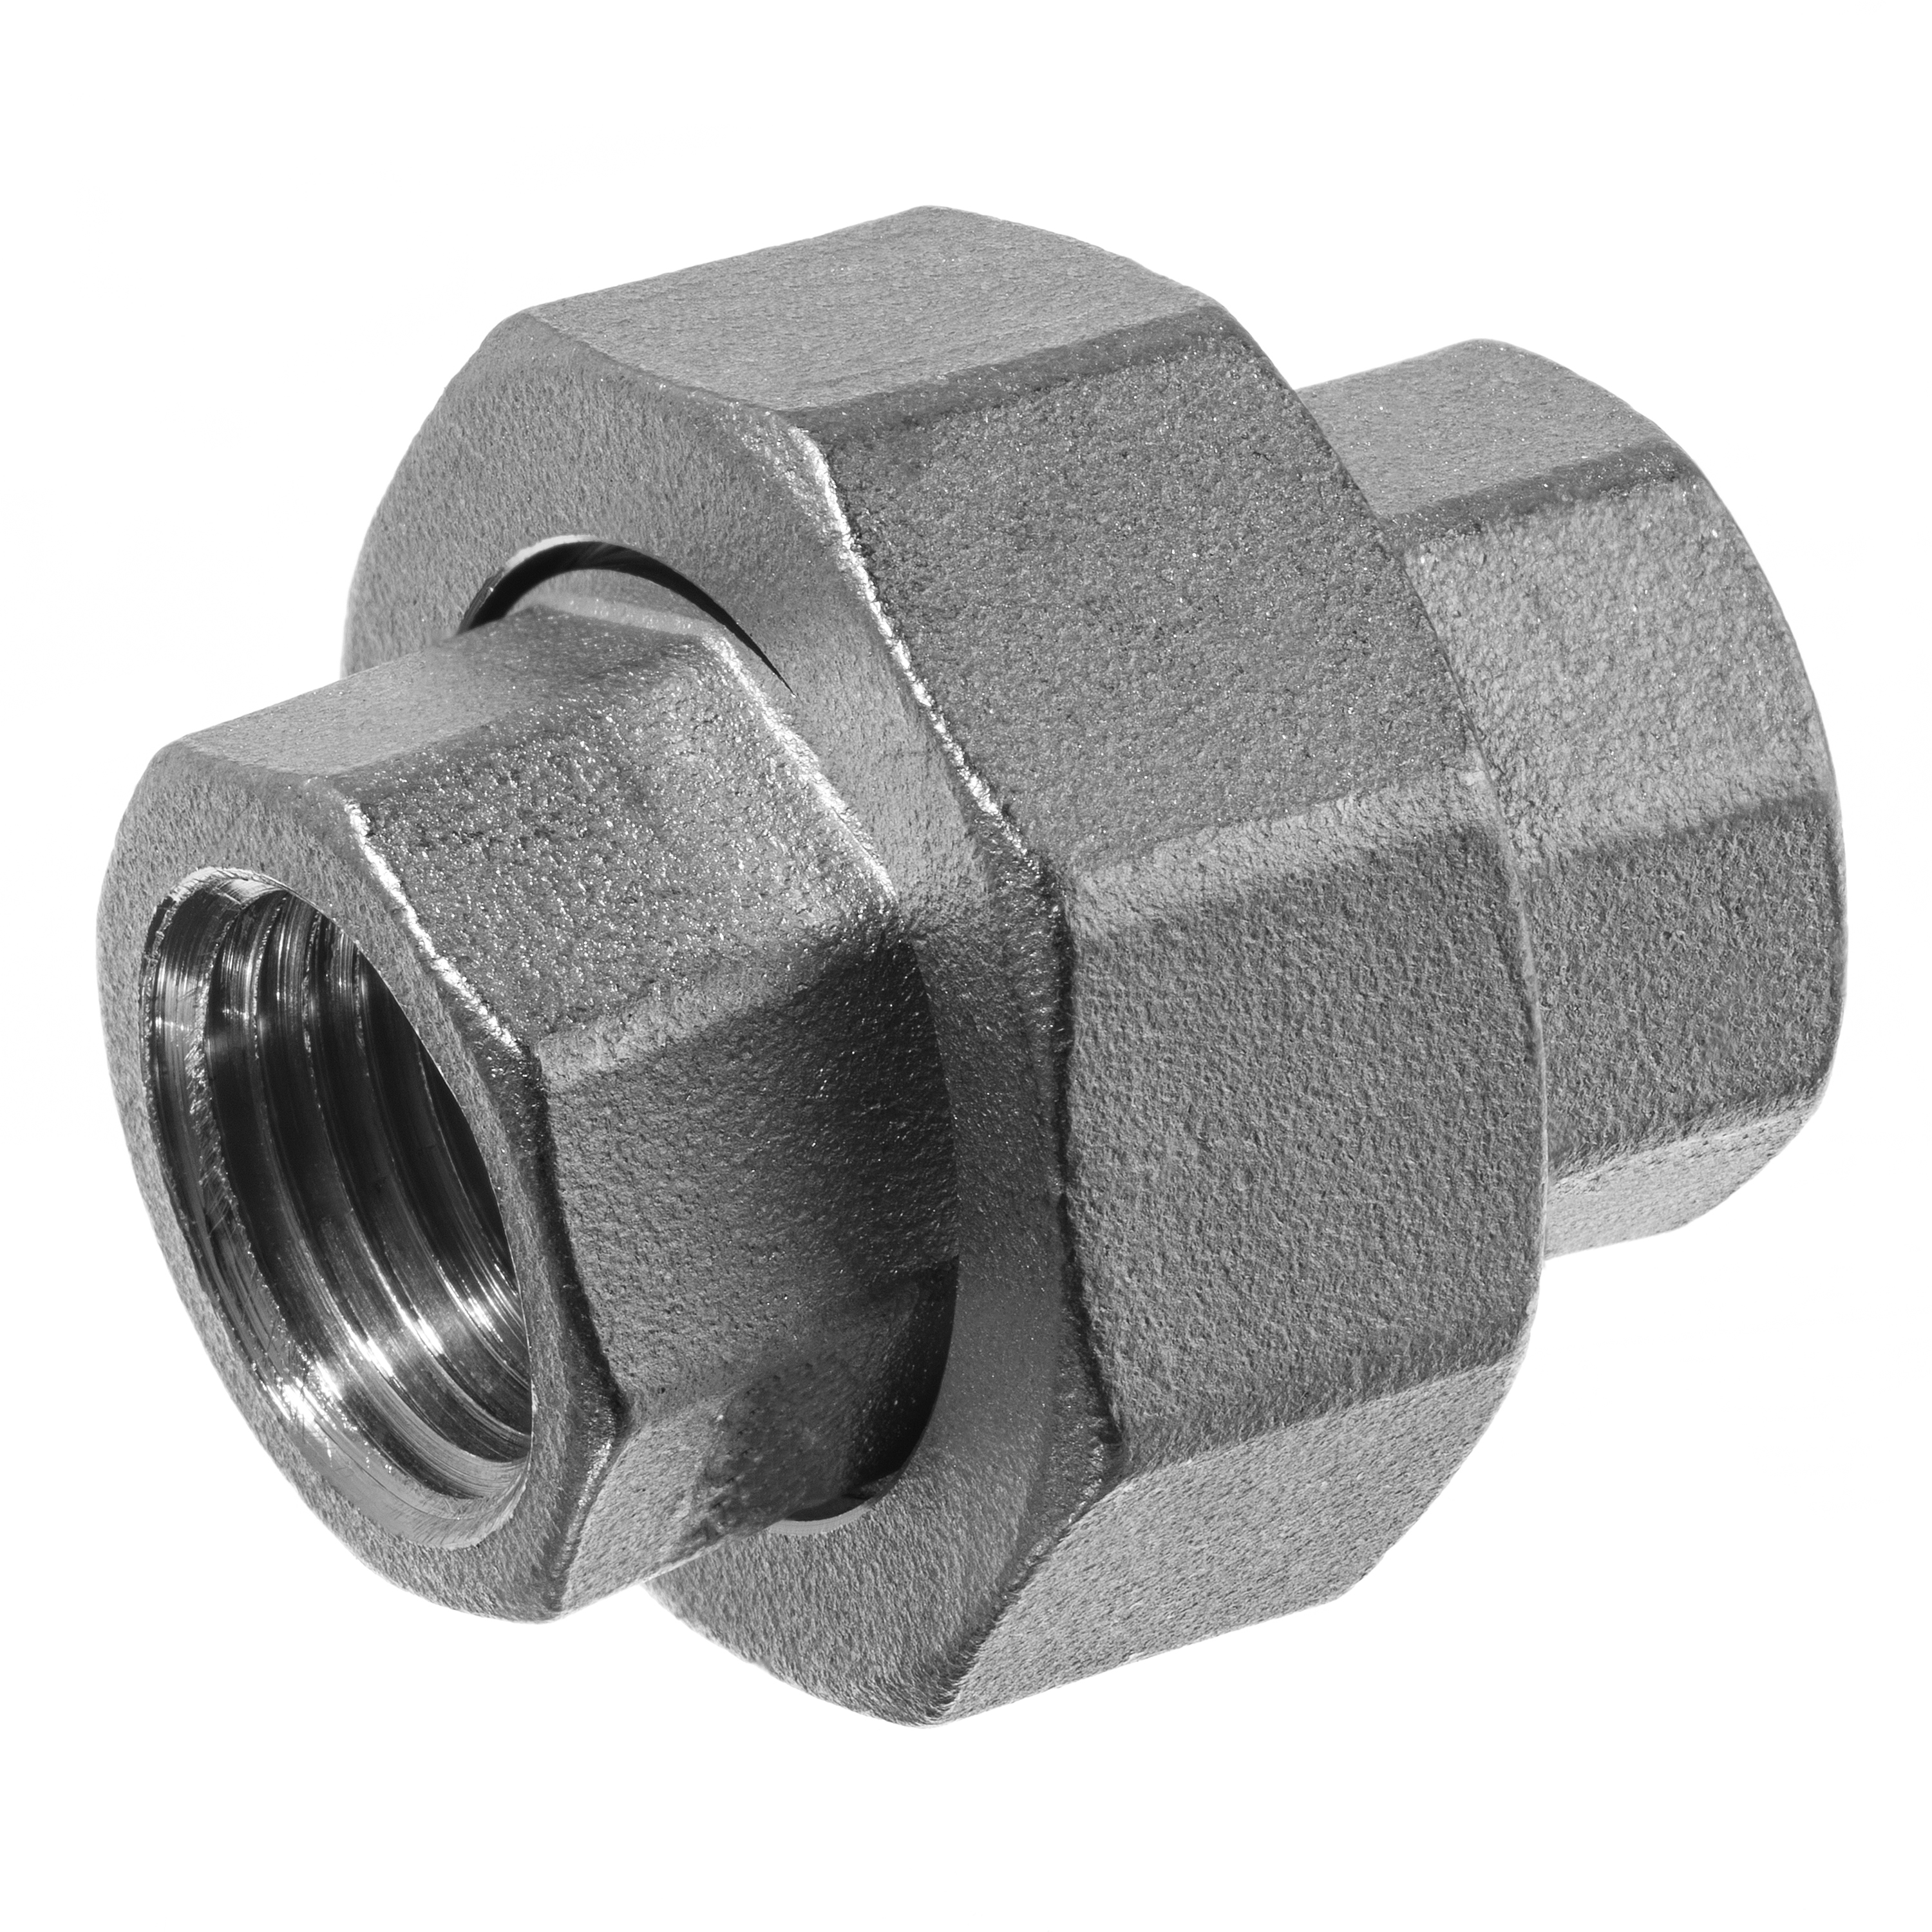 Pipe Fitting - Union, 304 Stainless Steel, Female BSPT, Class 150